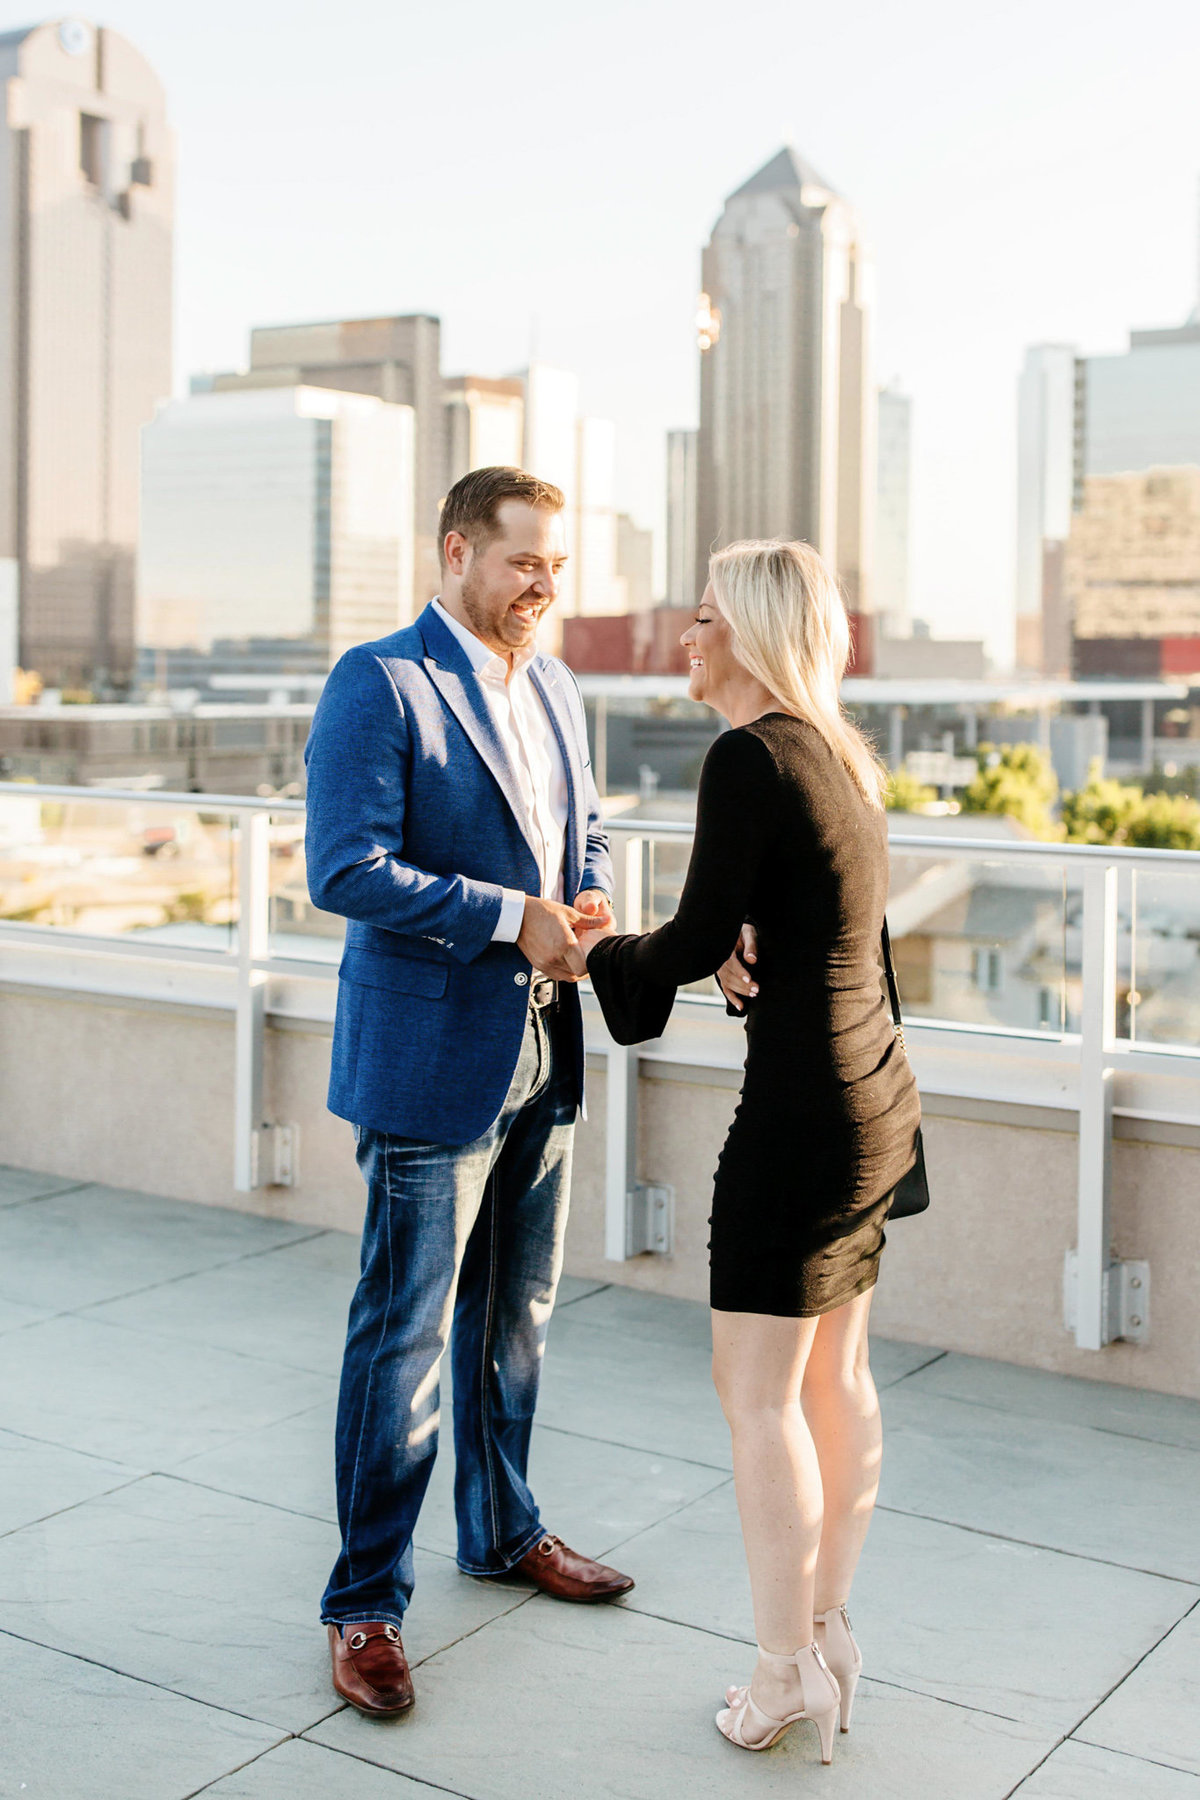 Eric & Megan - Downtown Dallas Rooftop Proposal & Engagement Session-22